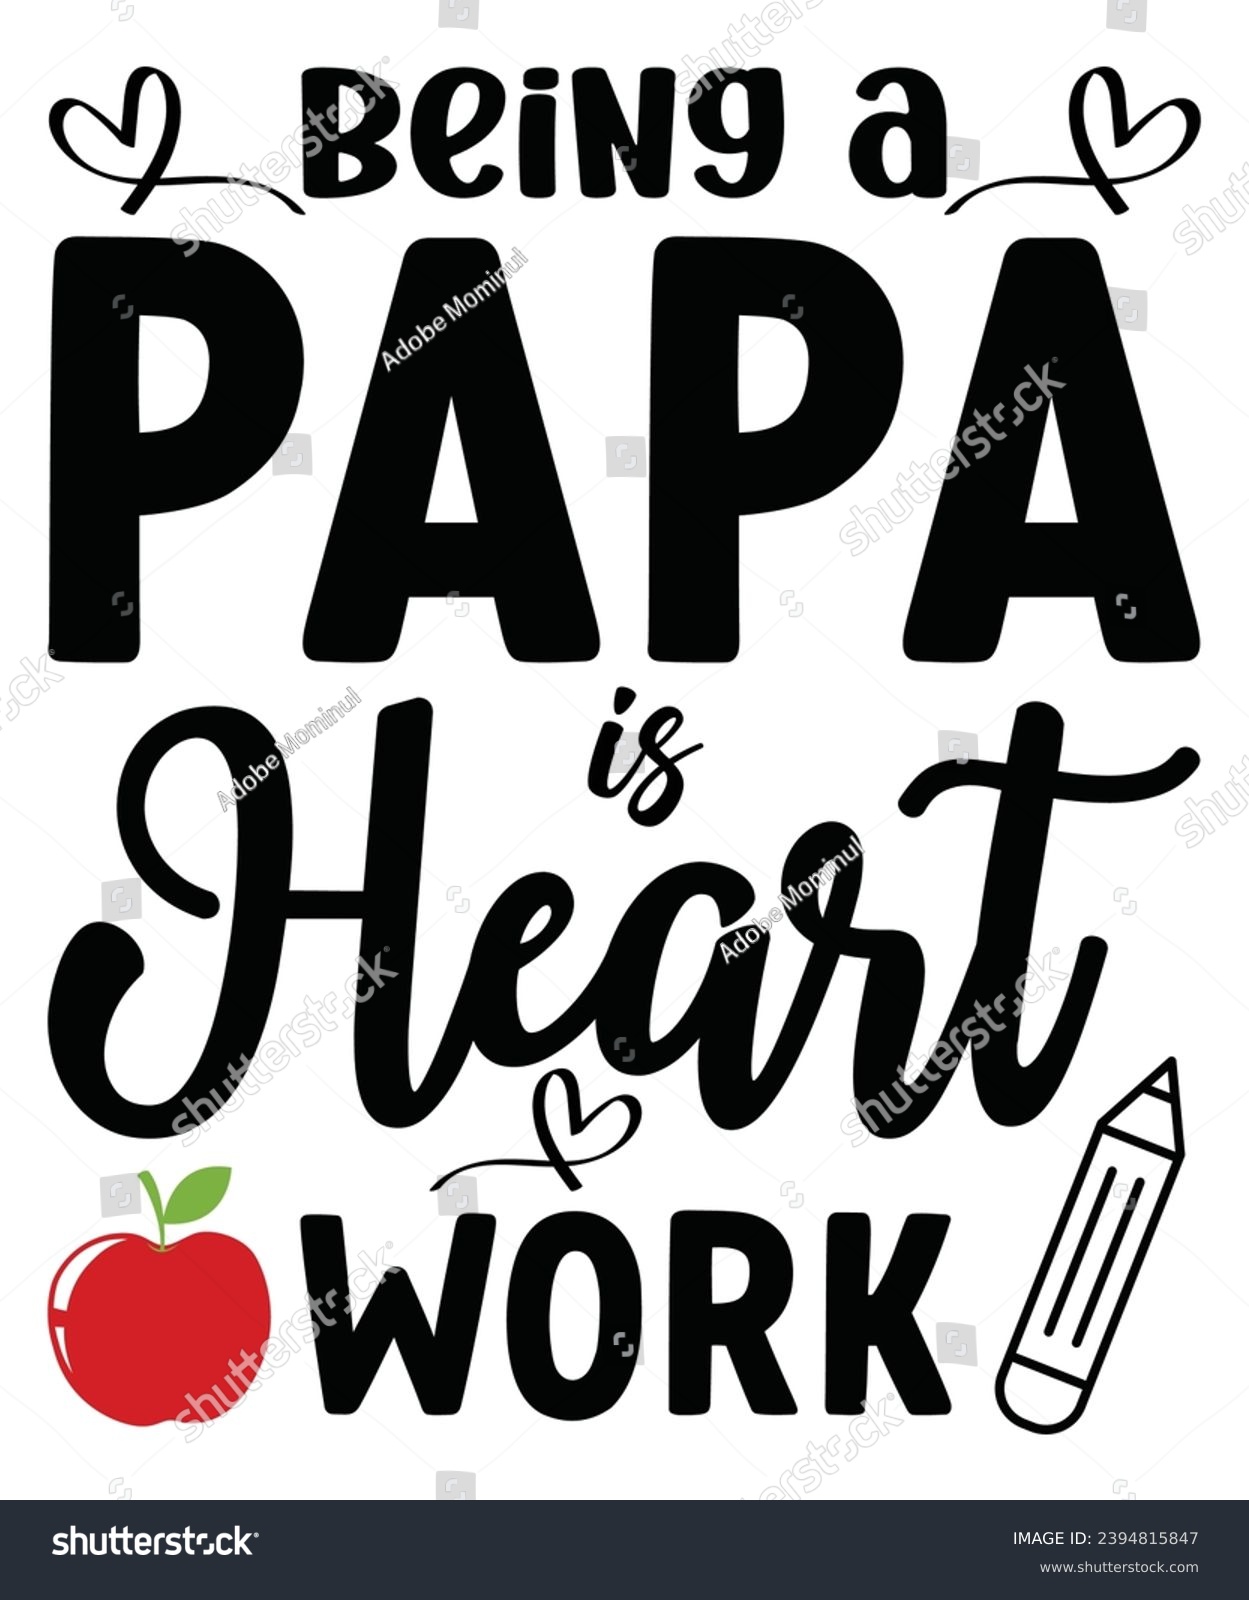 SVG of Being A Papa is Heart Work Svg,Teacher T-shirt, Back To School,Teacher Quotes T-shirt, Hello School Shirt, School Shirt for Kids, Kindergarten School, Retro, Typography, Cut File, svg